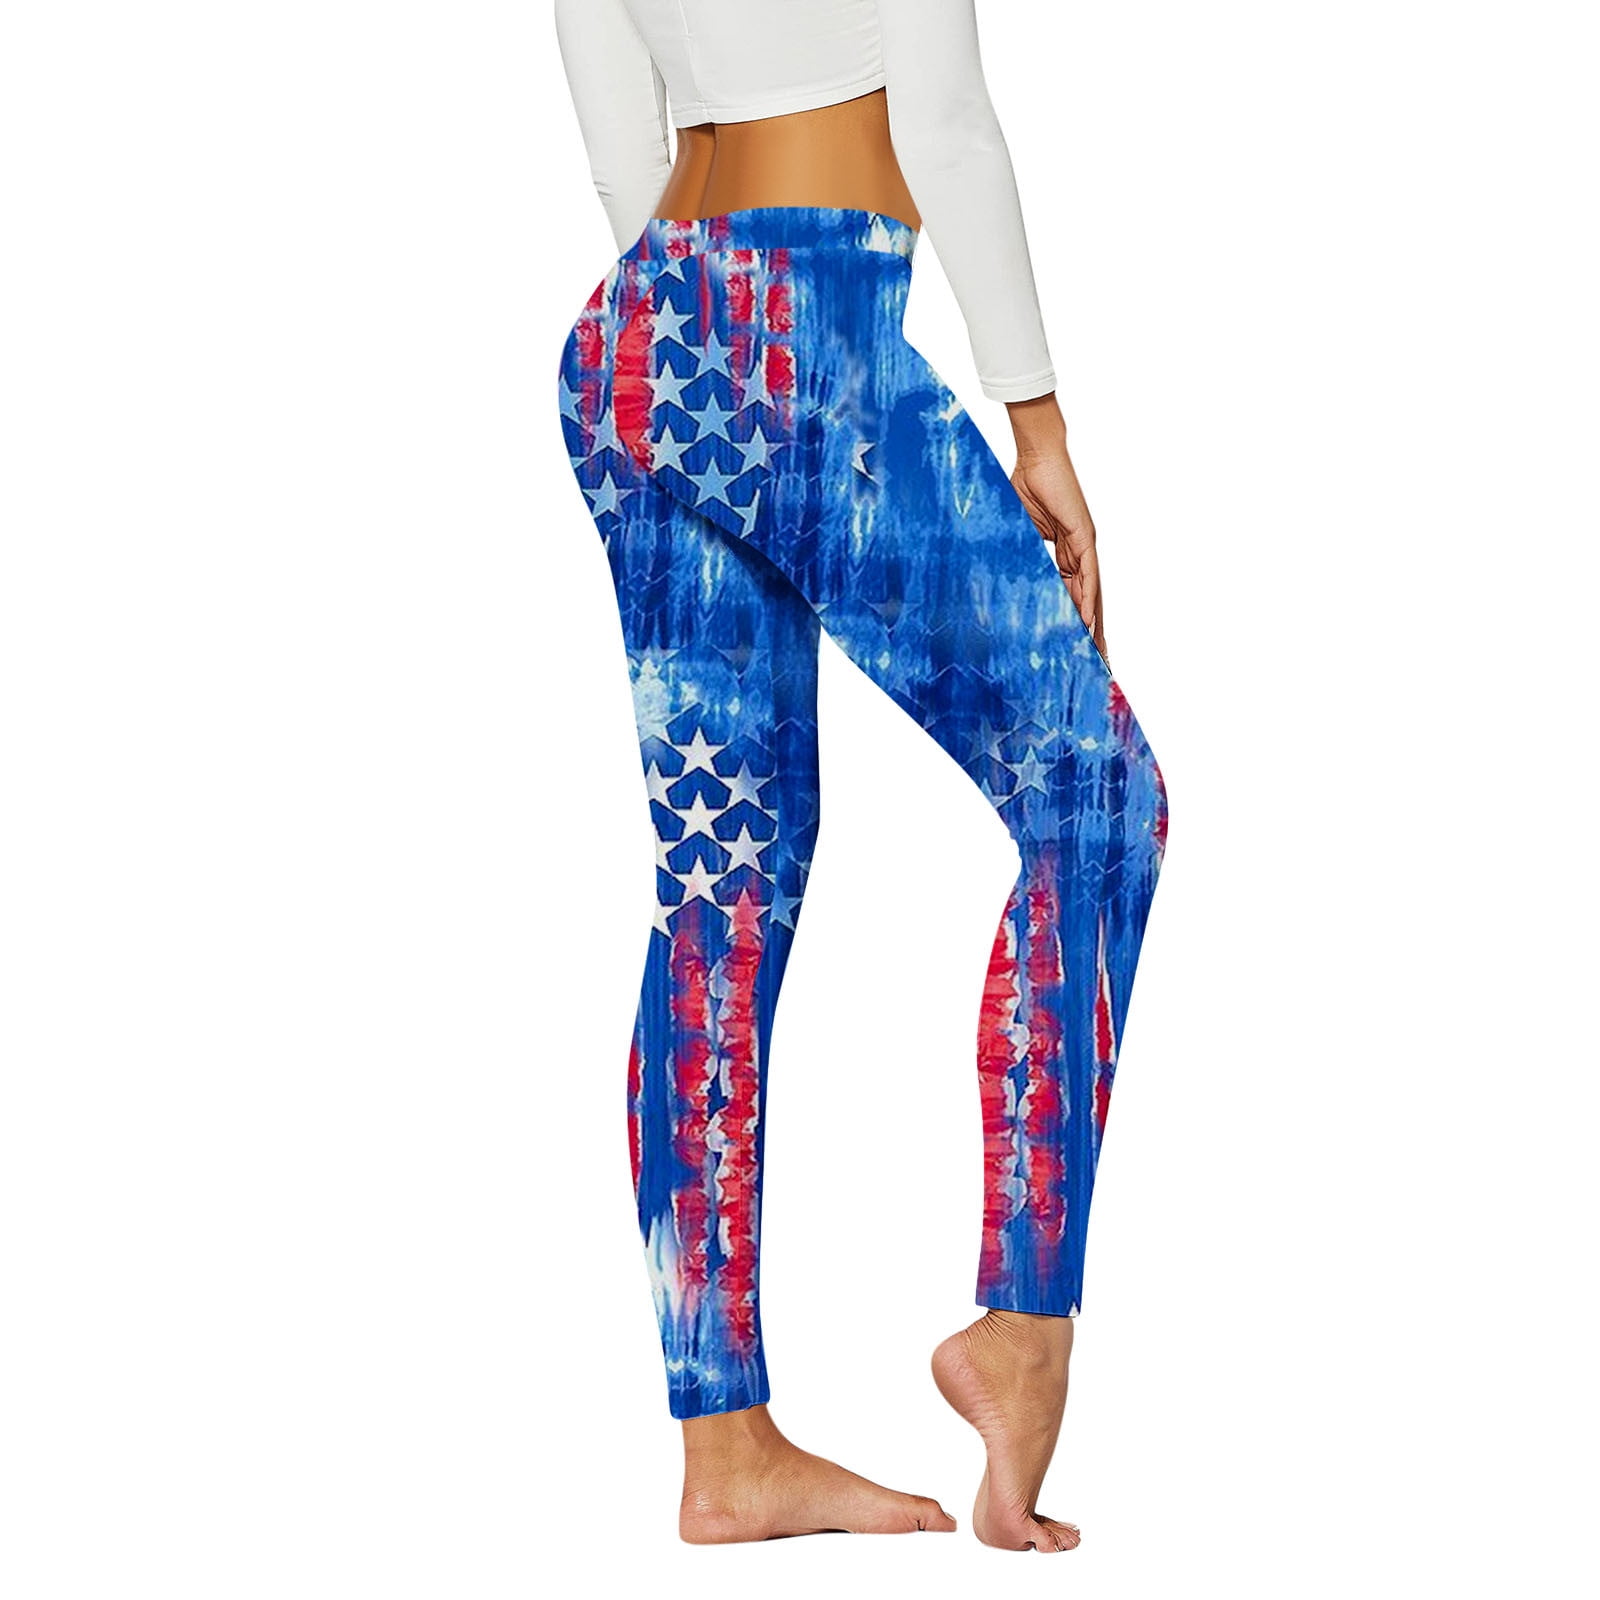 xinqinghao yoga leggings for women independence day for women's american  4th of july leggings for yoga running pilates gym yoga pants tights fitness  women yoga pants dark blue xxl 